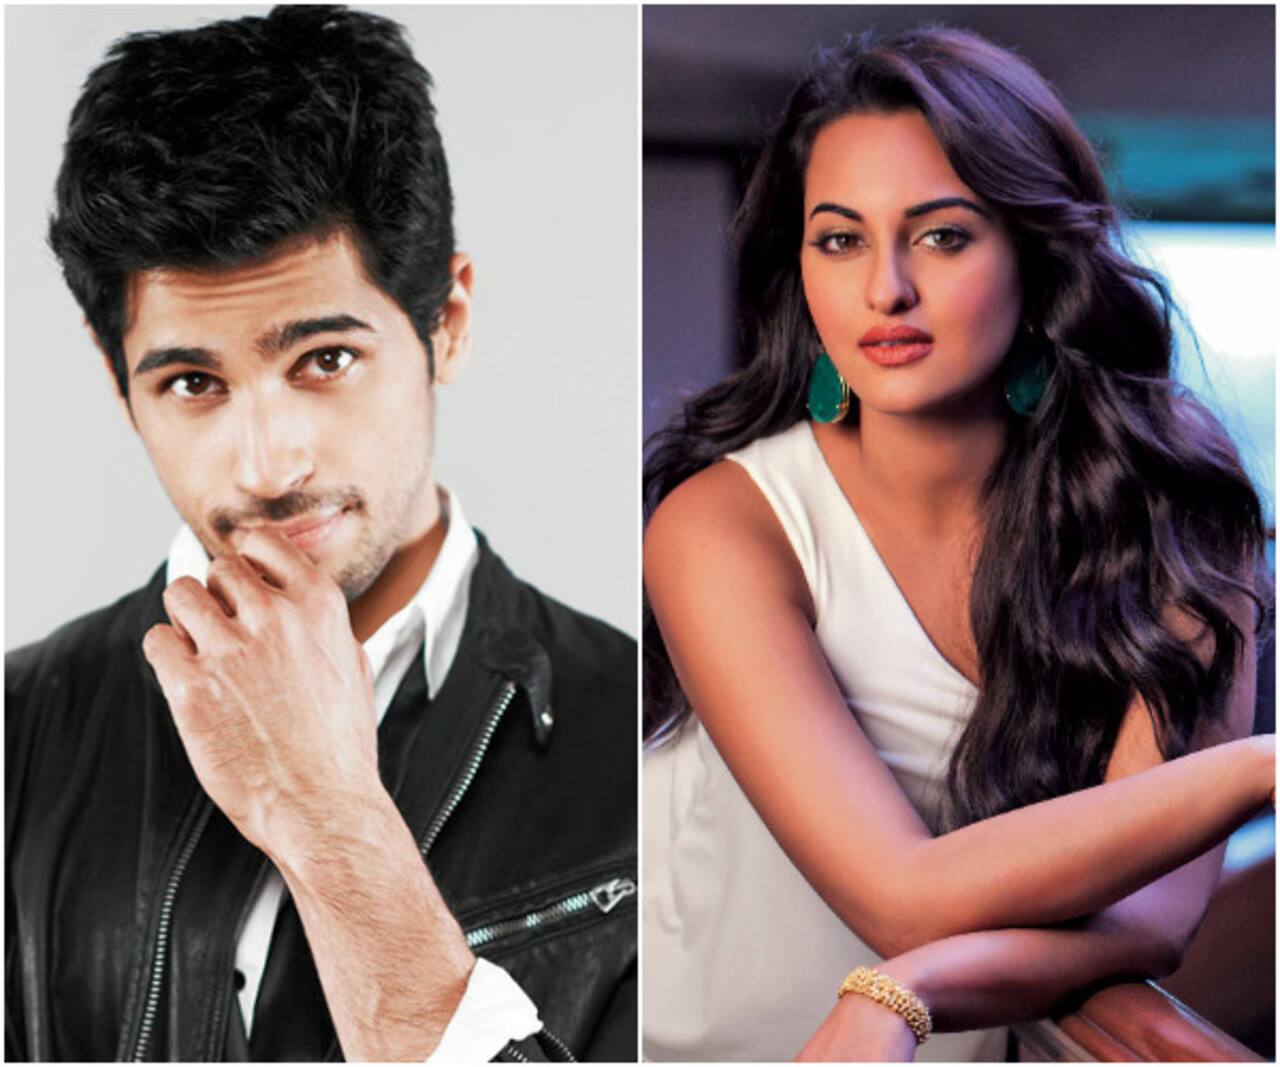 Sonakshi Sinha And Sidharth Malhotra Are Not Romancing Each Other In